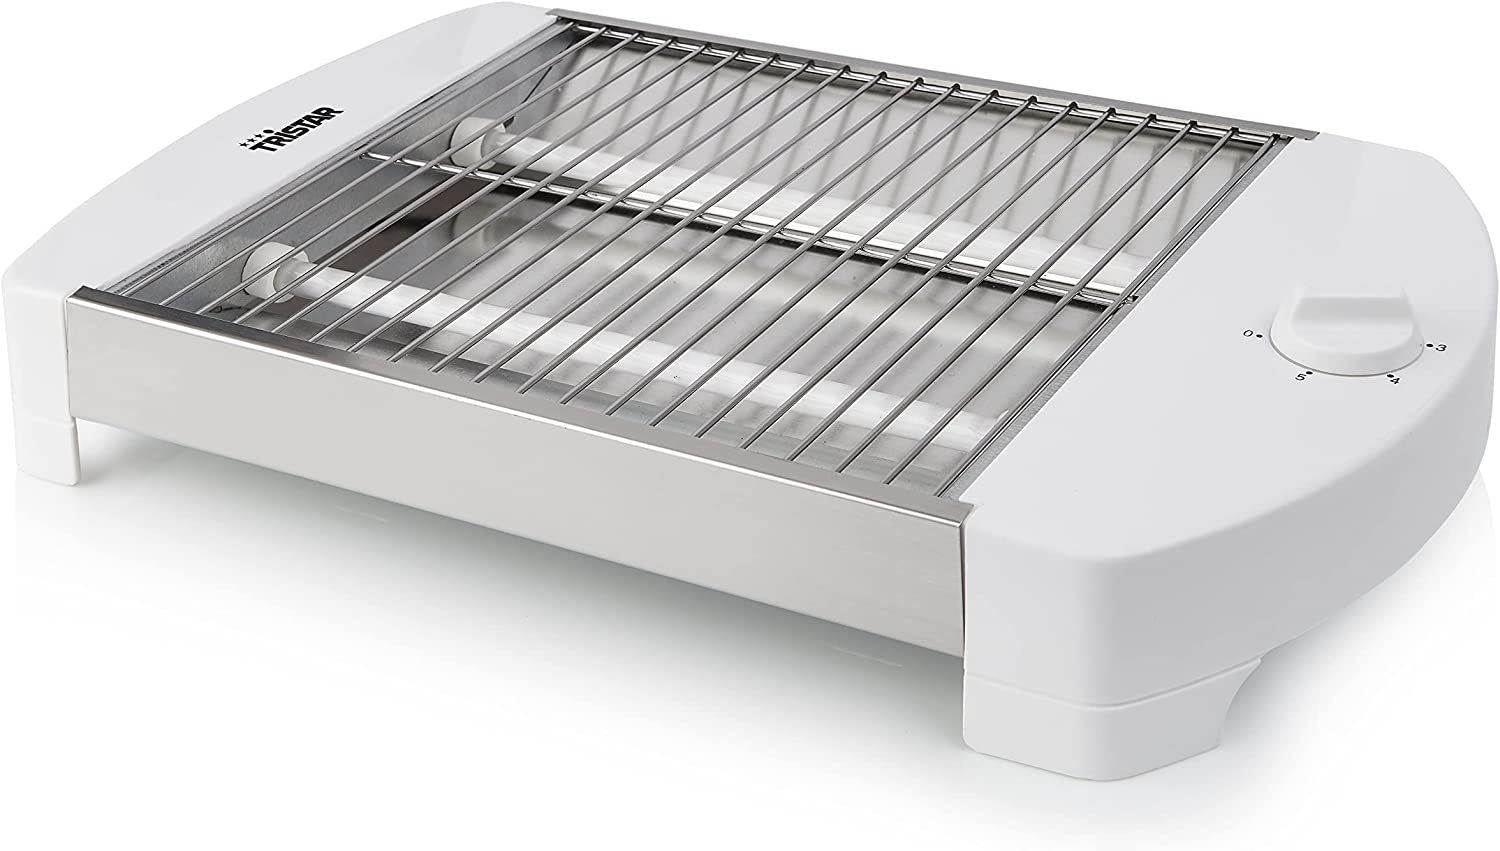 Tristar BR-2400 Flat Toaster / Bun Roaster with Countdown Timer and Crumb Tray, 400 W